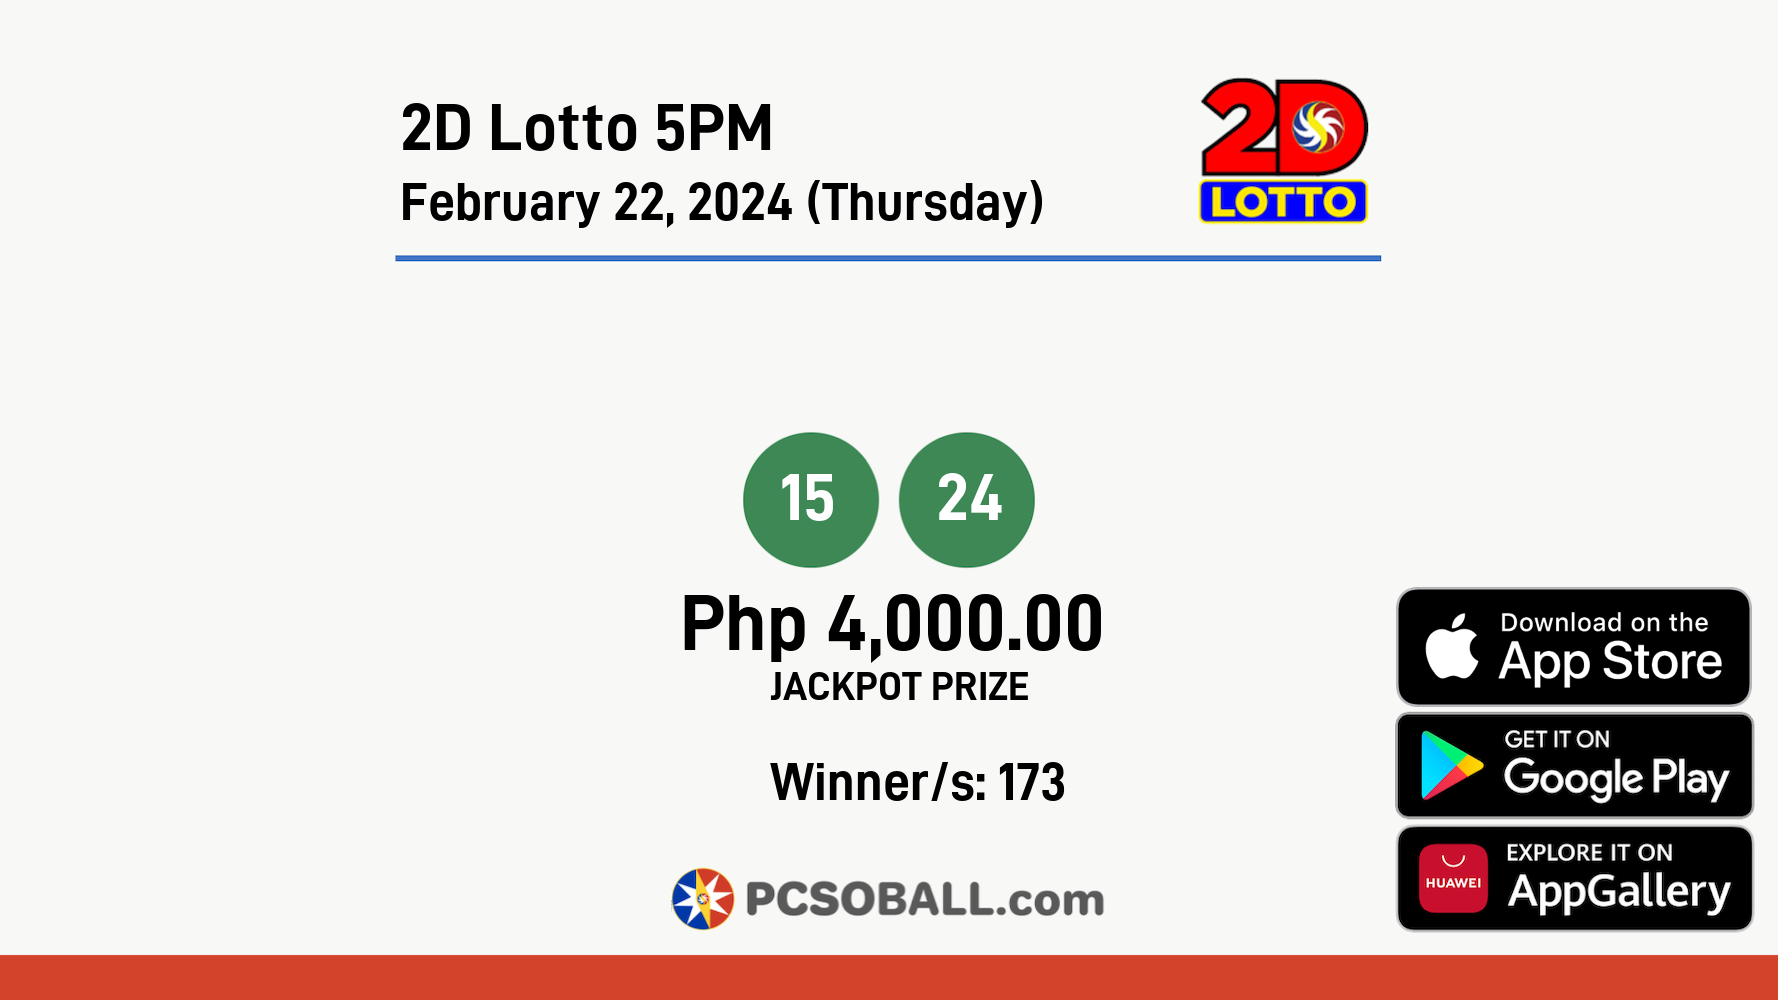 2D Lotto 5PM February 22, 2024 (Thursday) Result